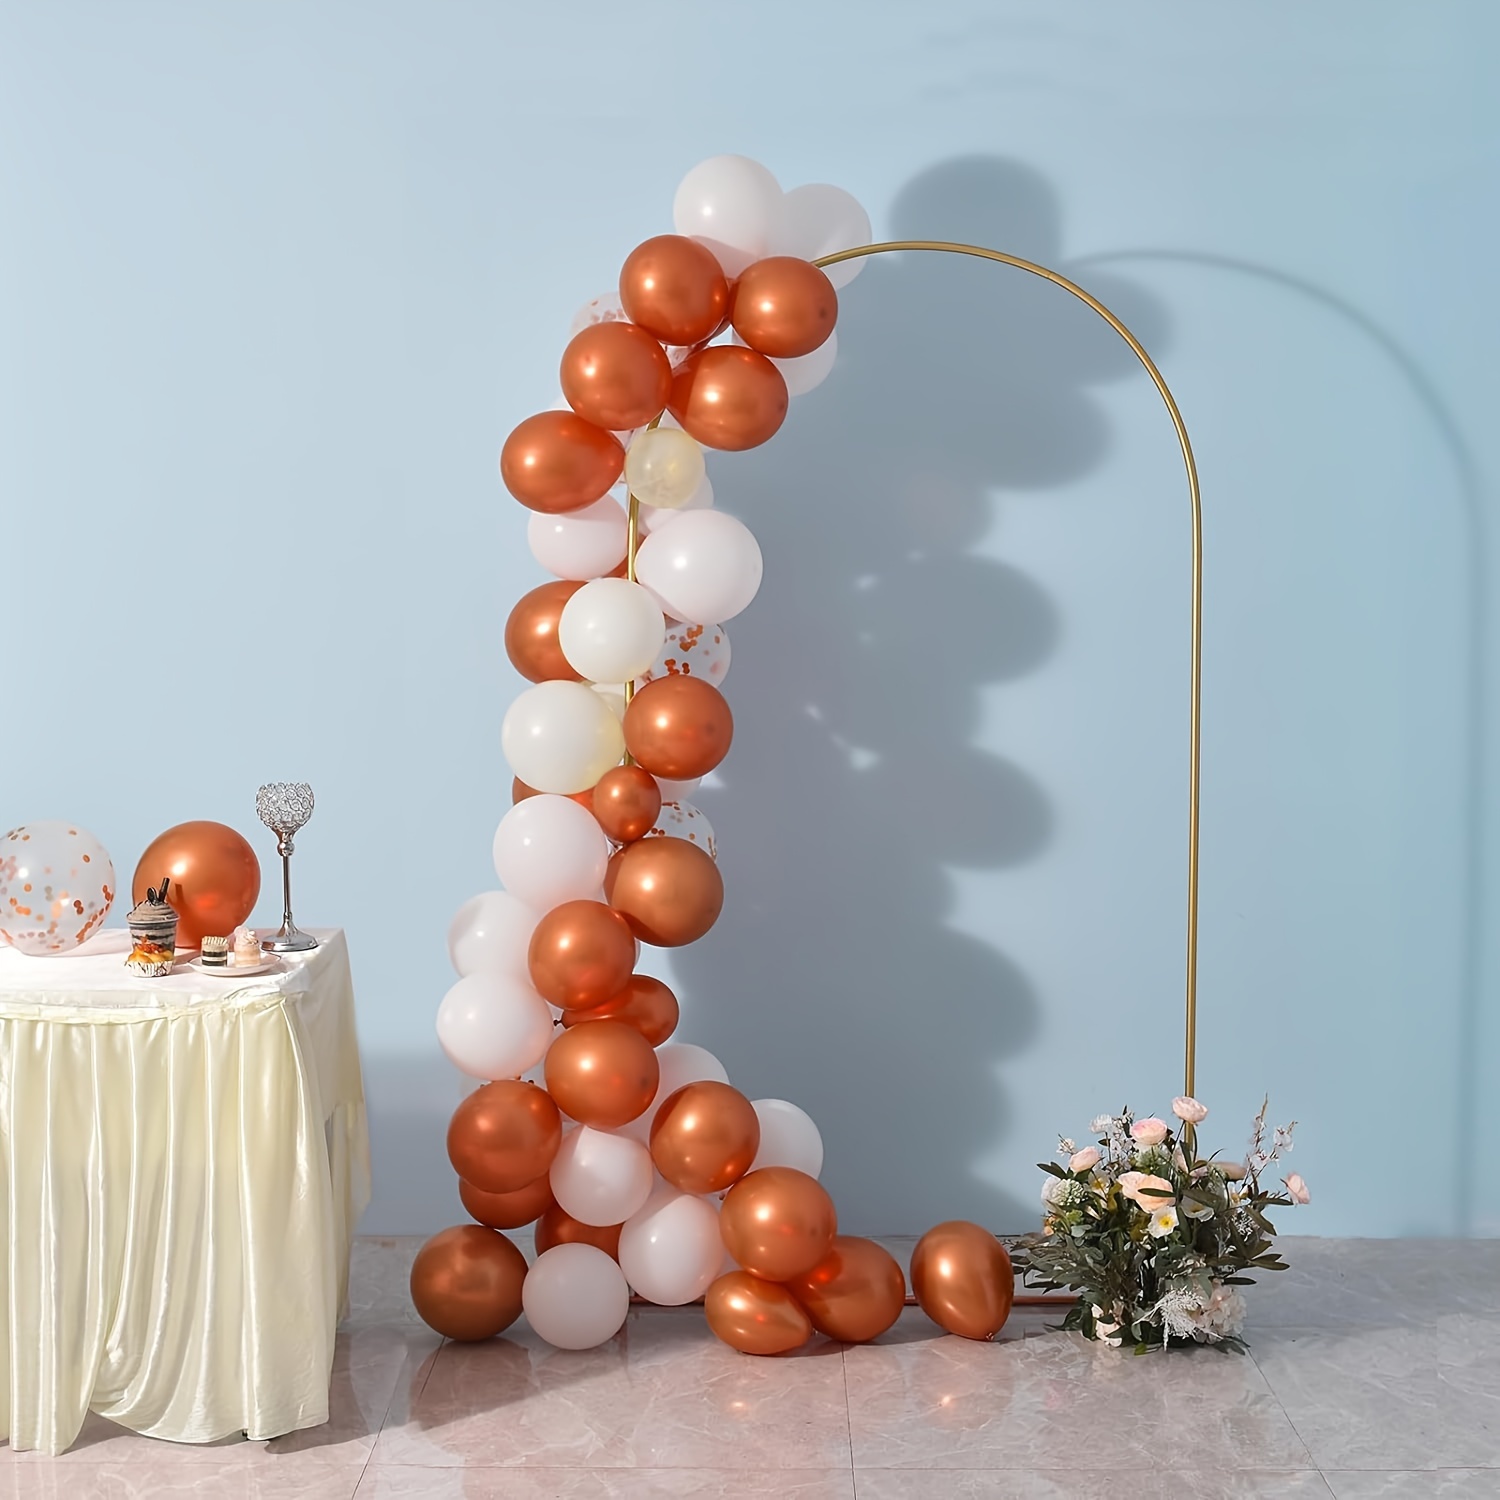 

Metal Arch Backdrop Stand Gold Wedding Balloon Arched Backdrop Stand Square Arch Frame For Birthday Party Bridal Baby Shower Ceremony Decoration